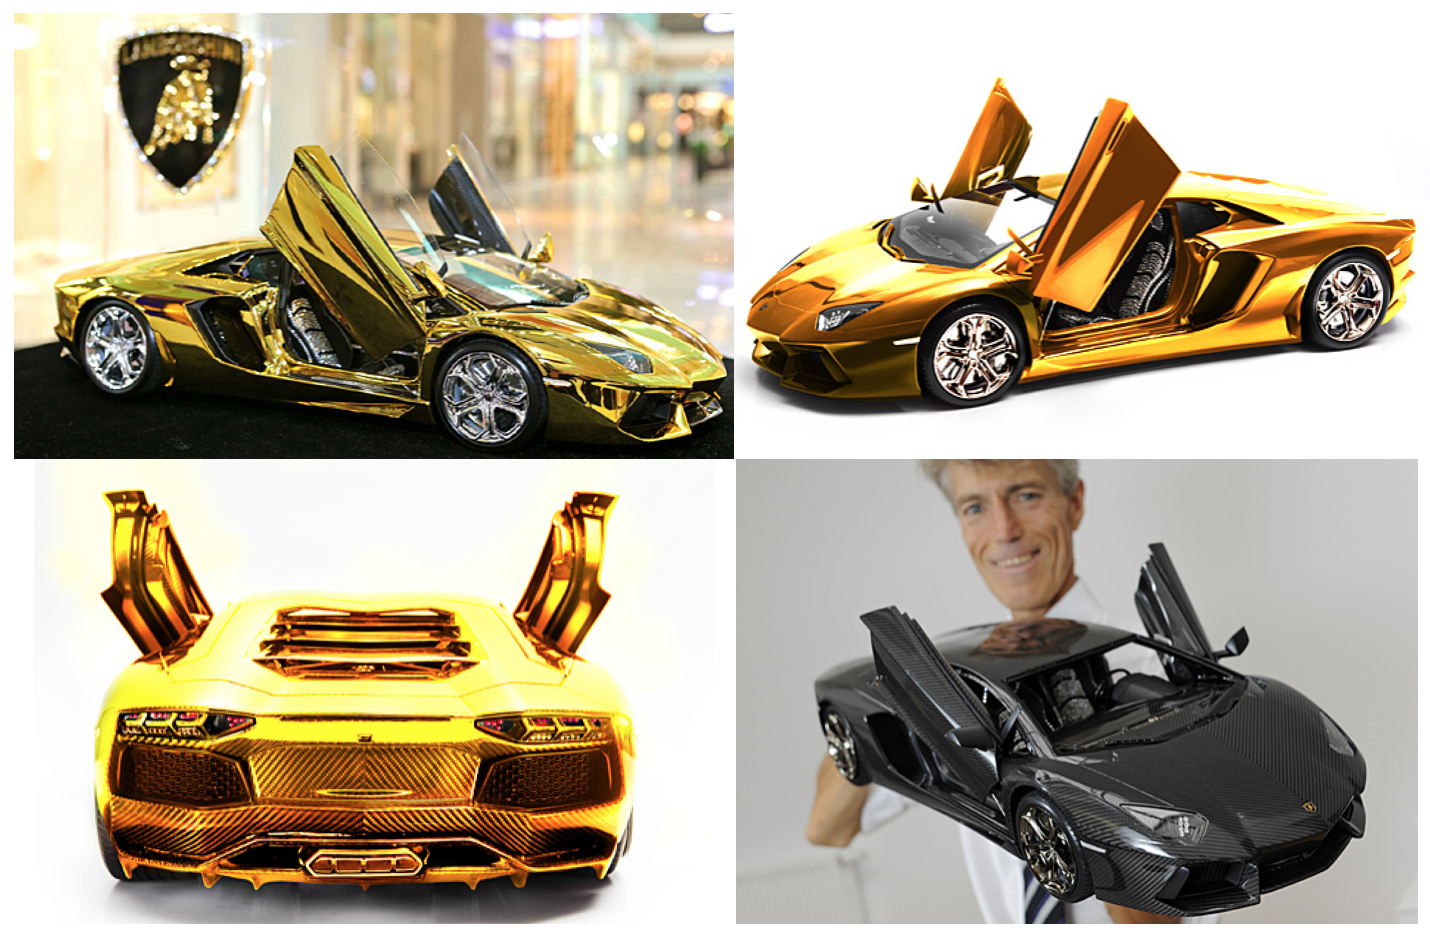 8 Most Expensive Toys & Baby Gifts in the World - Qosy